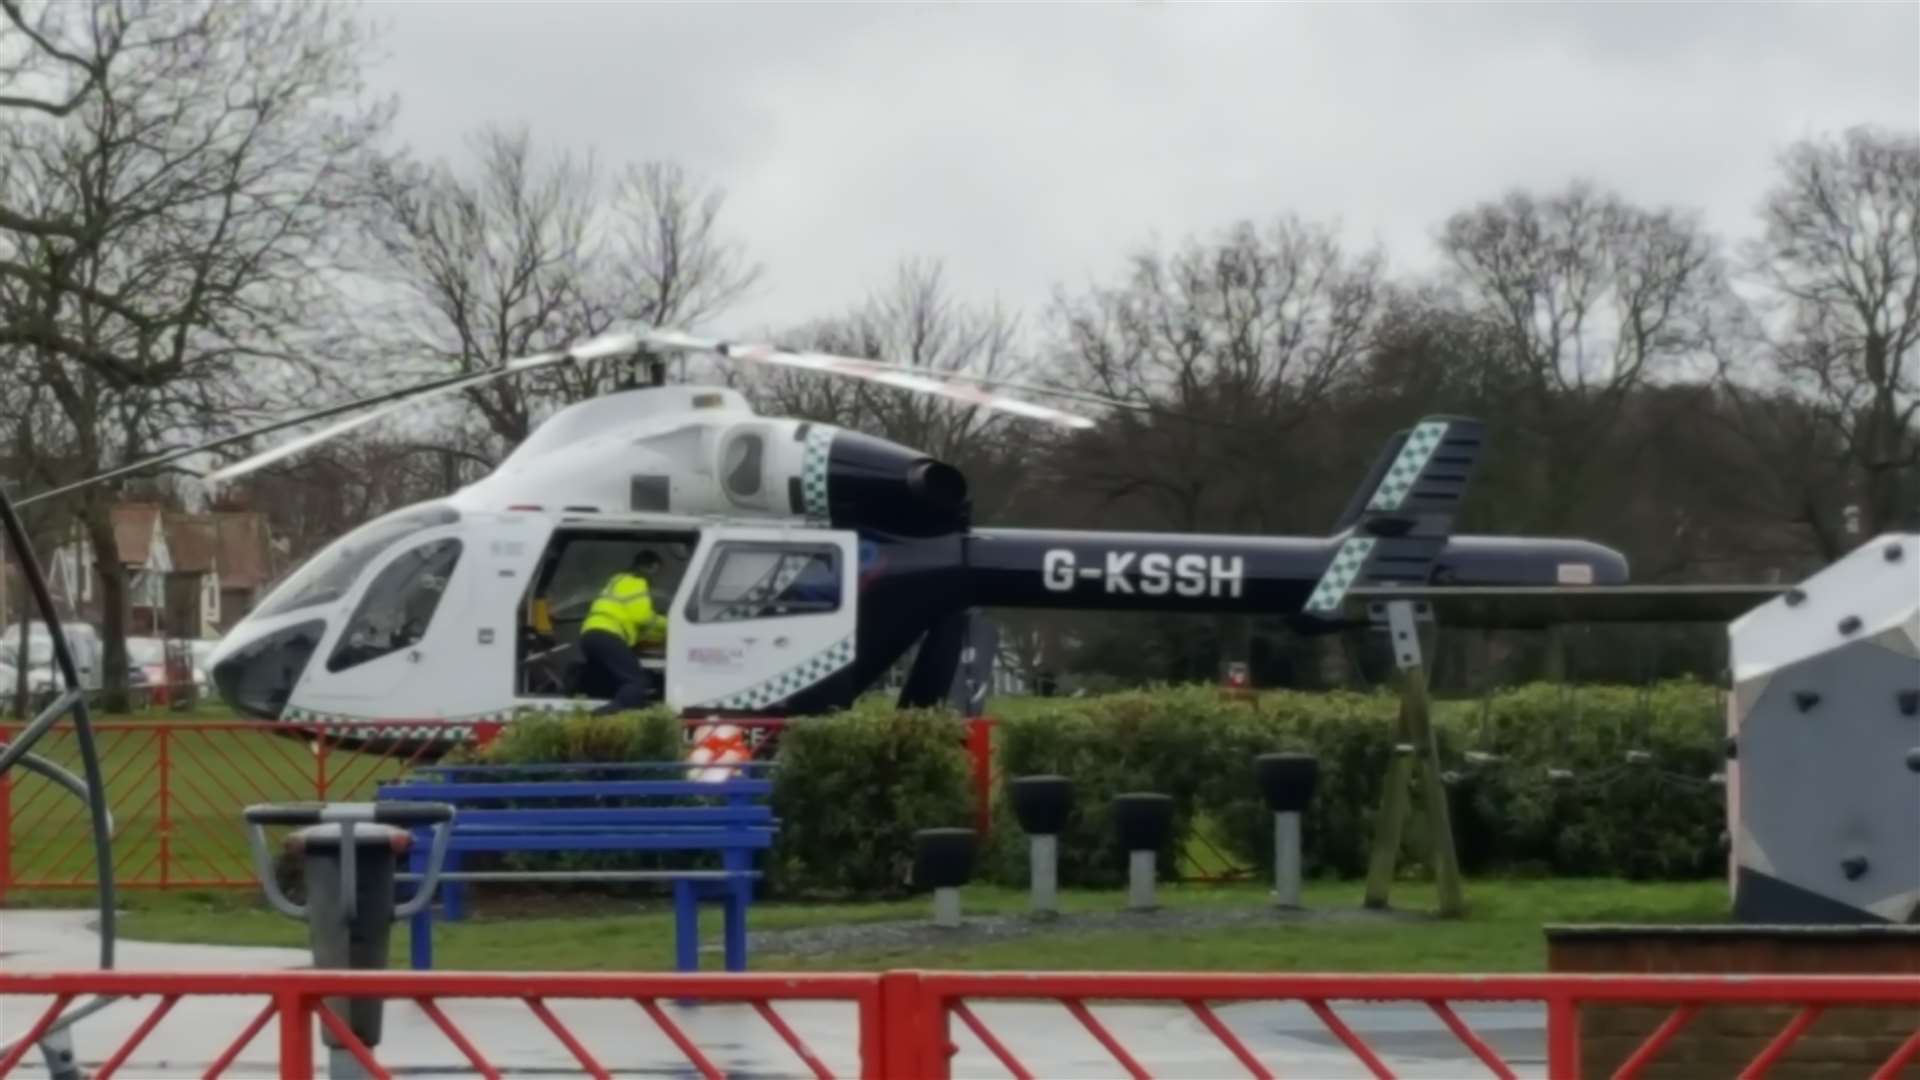 The helicopter landed in Herne Bay's Memorial Park this morning (30601481)